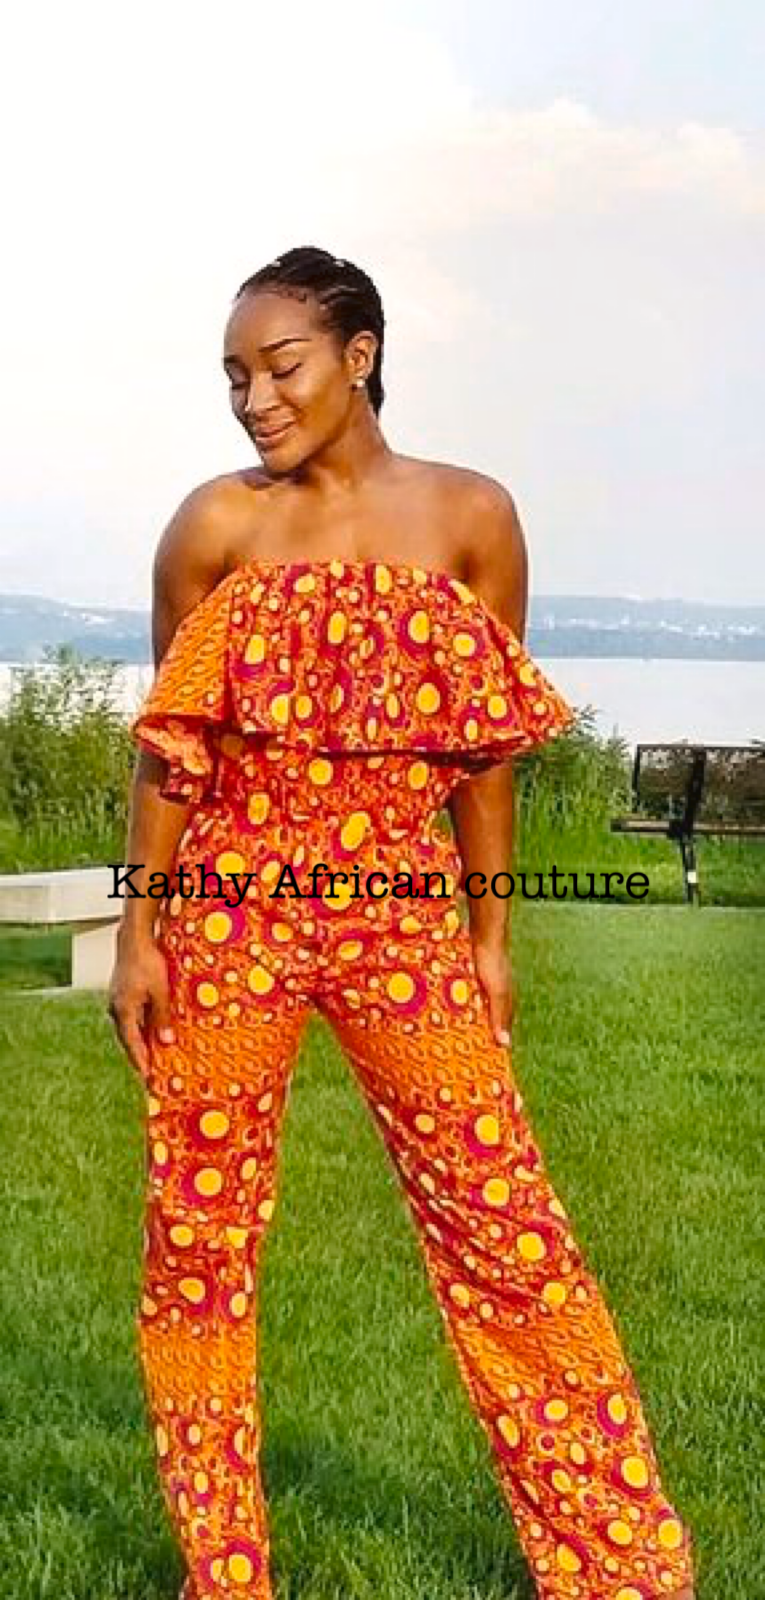 Kathy African Couture | 67 Duncan Ave, Cornwall-On-Hudson, NY 12520 | Phone: (845) 248-9194